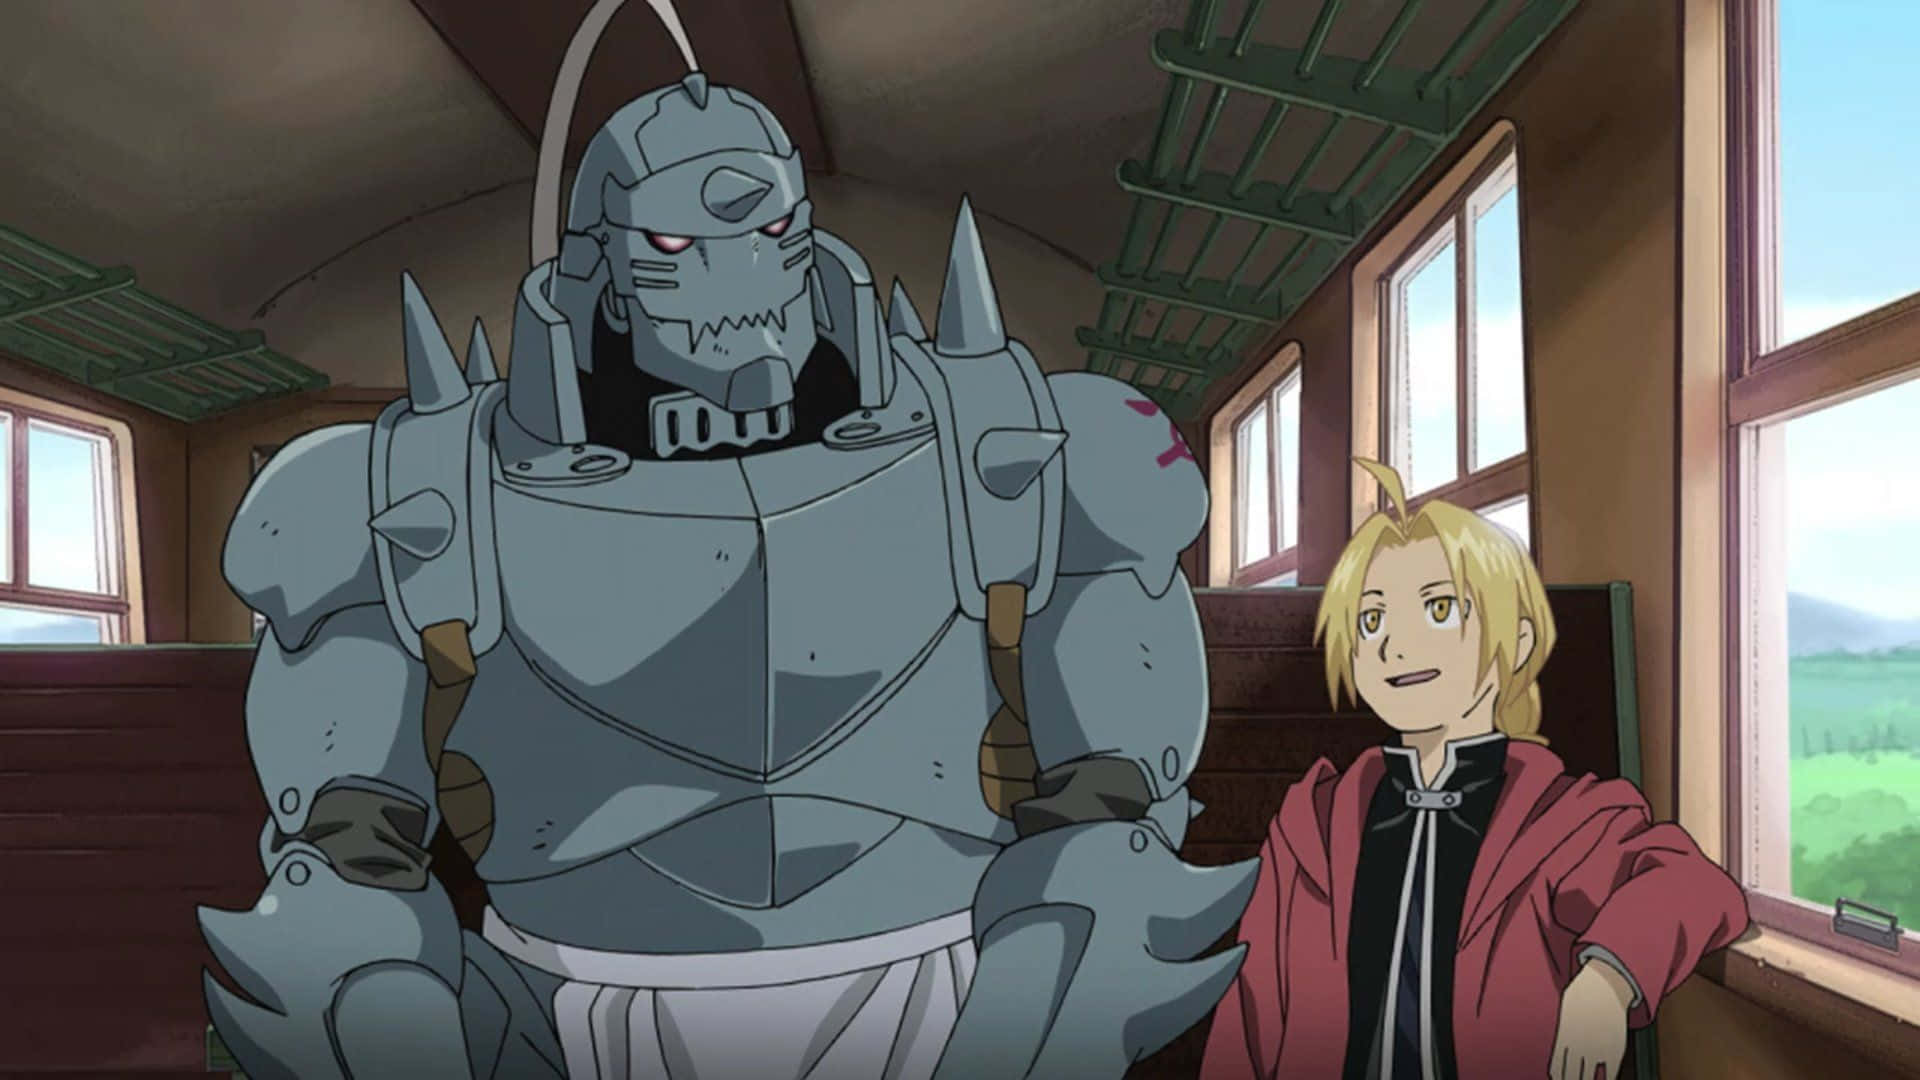 Alphonse Elric with a mysterious gaze in front of a softly lit background. Wallpaper